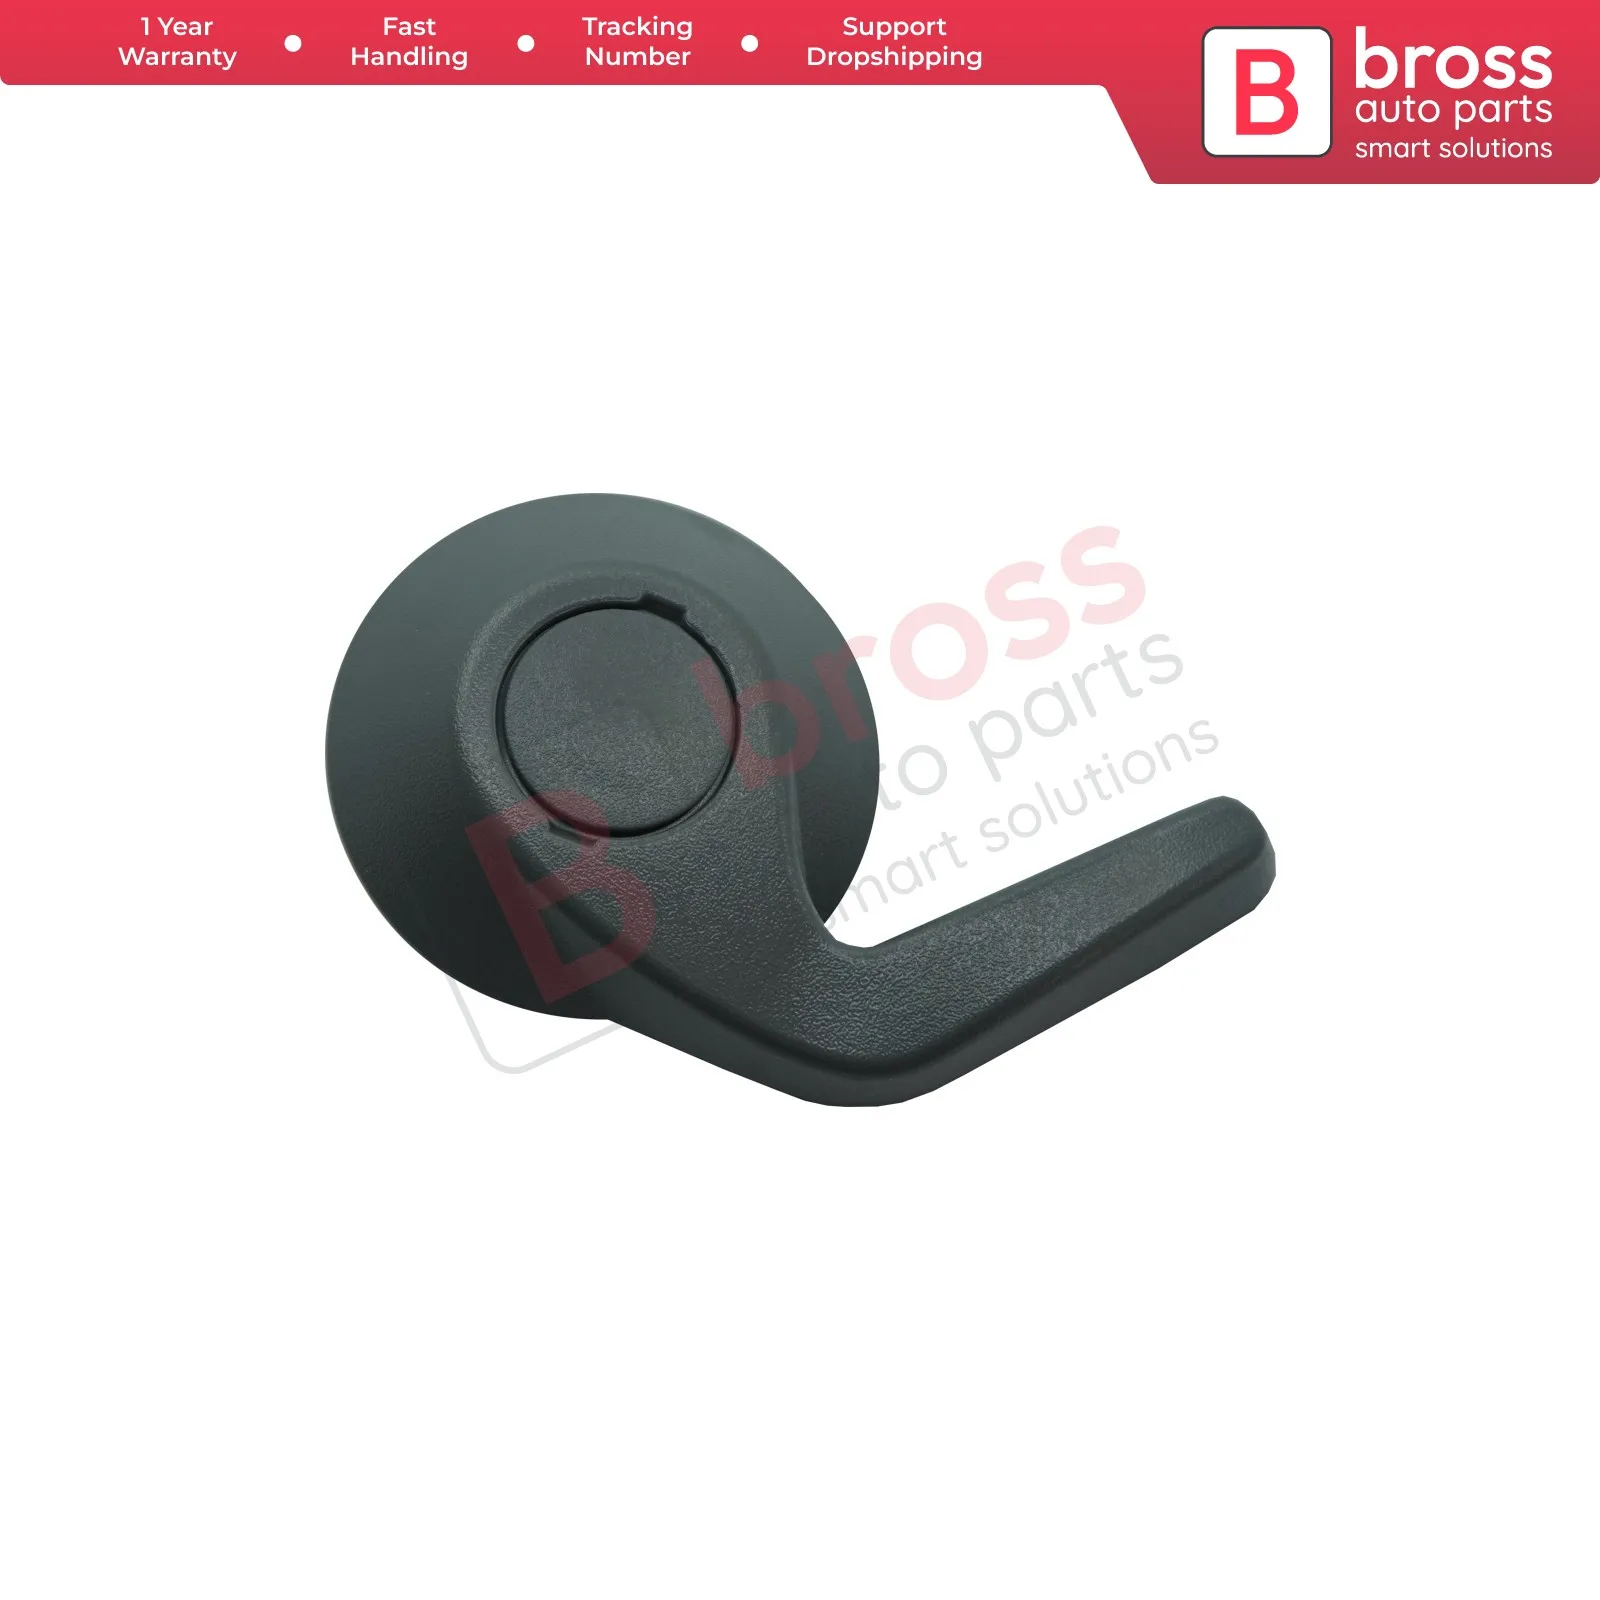 

Bross Auto Parts BDP620-1 Seat Handle Adjustment Grip Lever Front Left Seat 7701209971 GRAY COLOR for Renault Kangoo MK2 2008-on